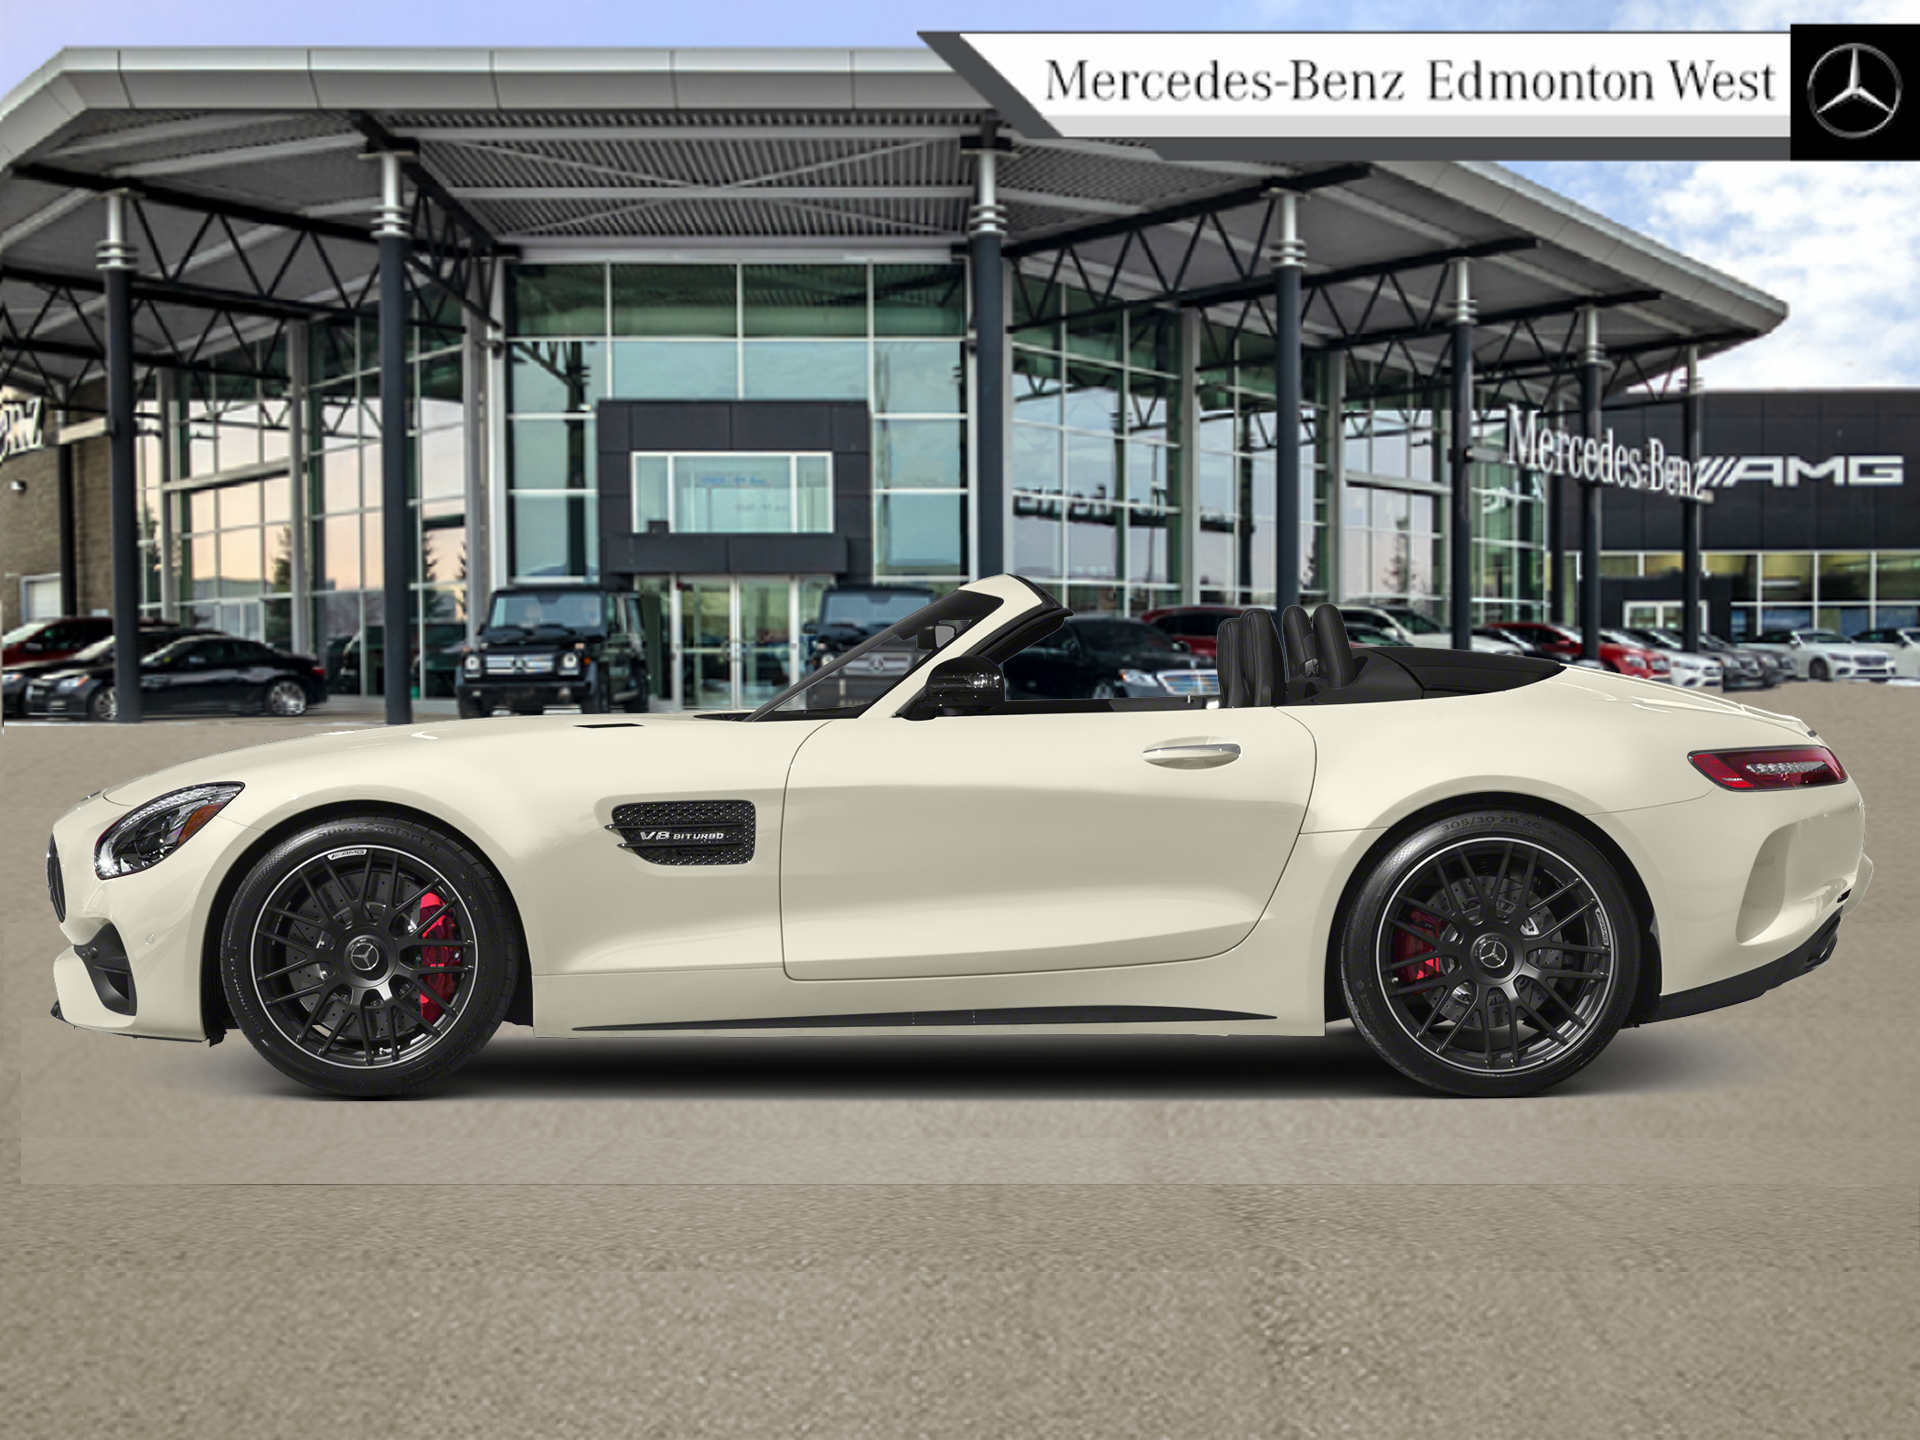 2018 Mercedes-Benz AMG GT C Roadster  - Low Kms - Xpel Protection Film - 550